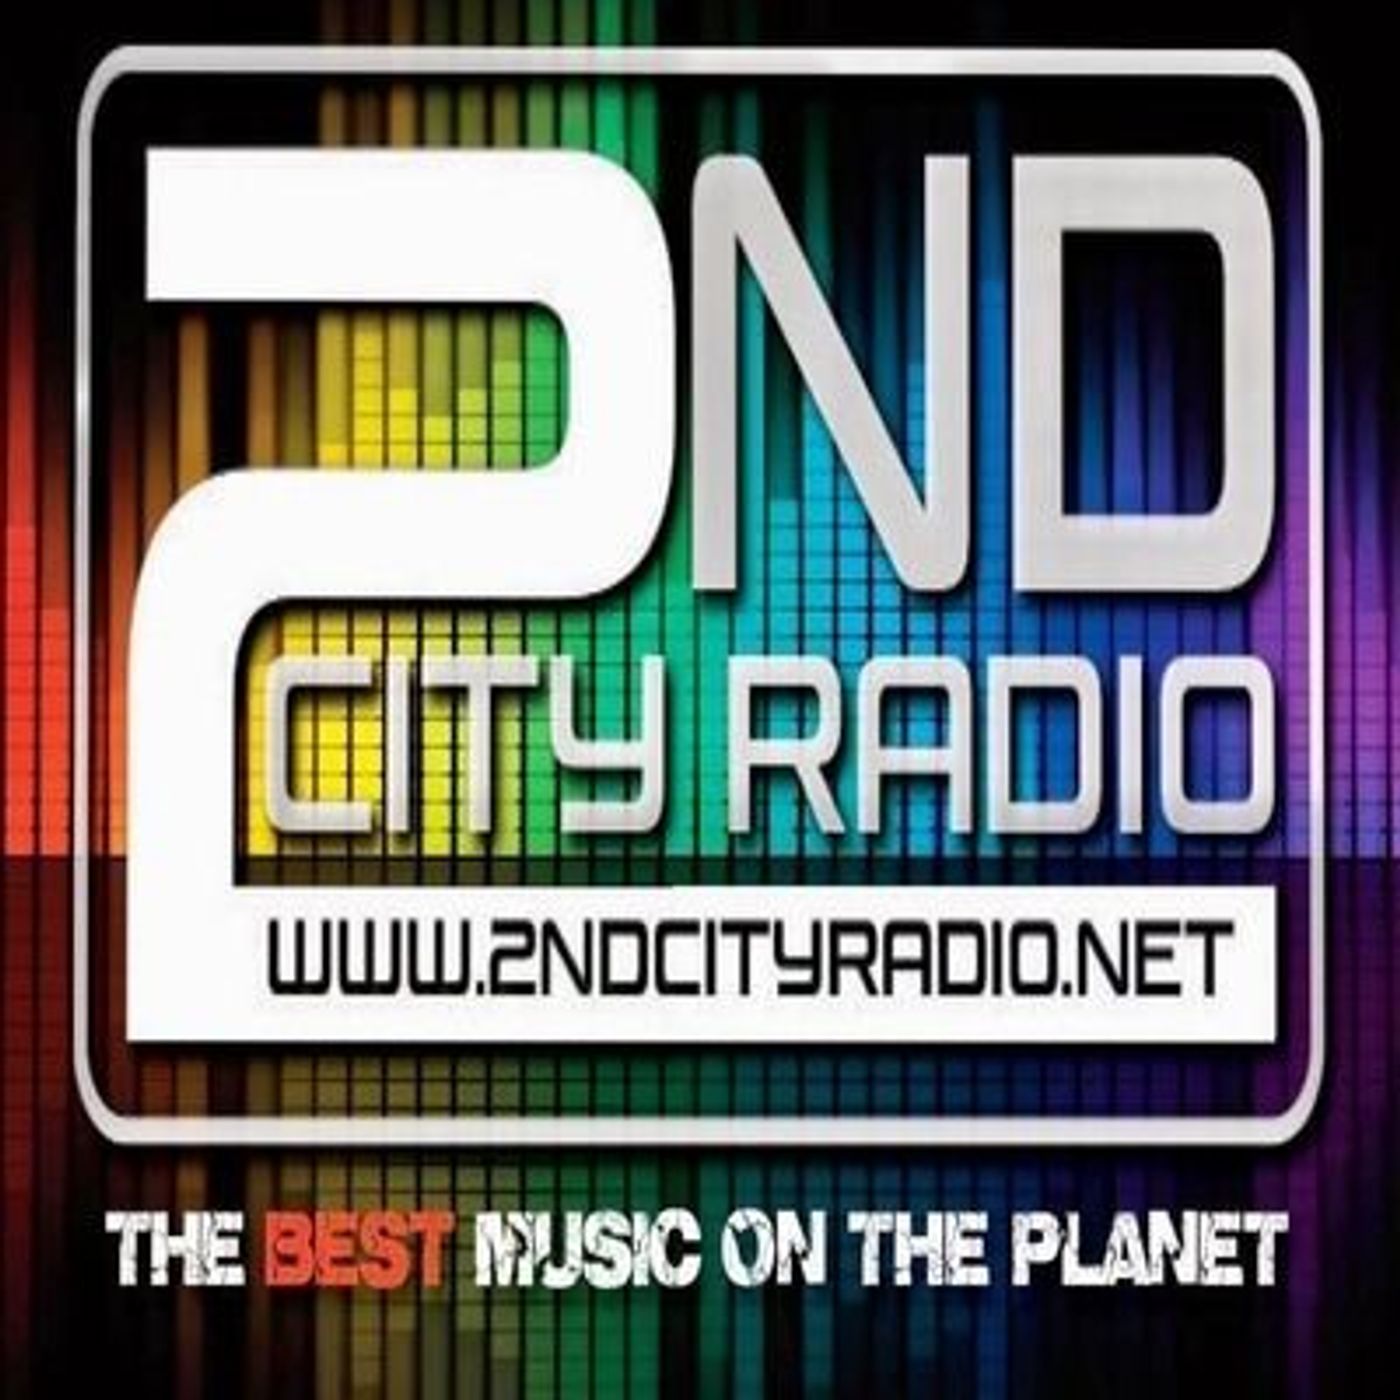 Saturday the 30th of April 2022on 2ndcity Radio with Classic Chat